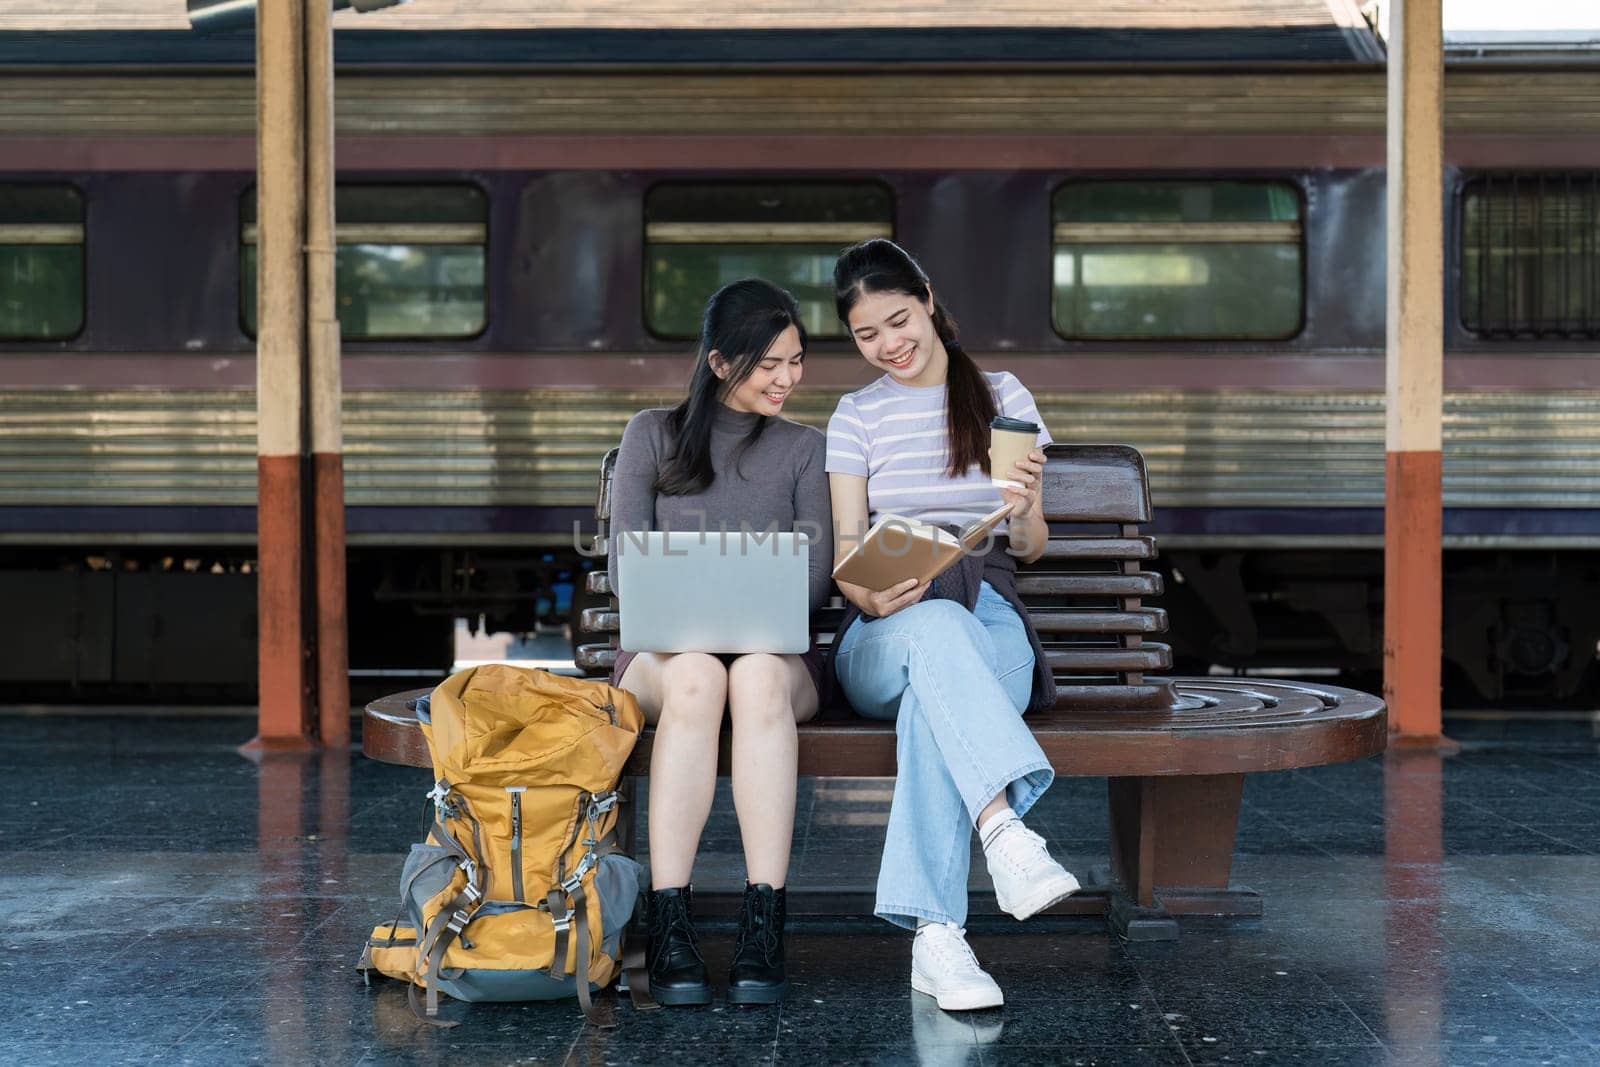 Asian woman friends using laptop and note for planing trip together at railway station have happy moment.